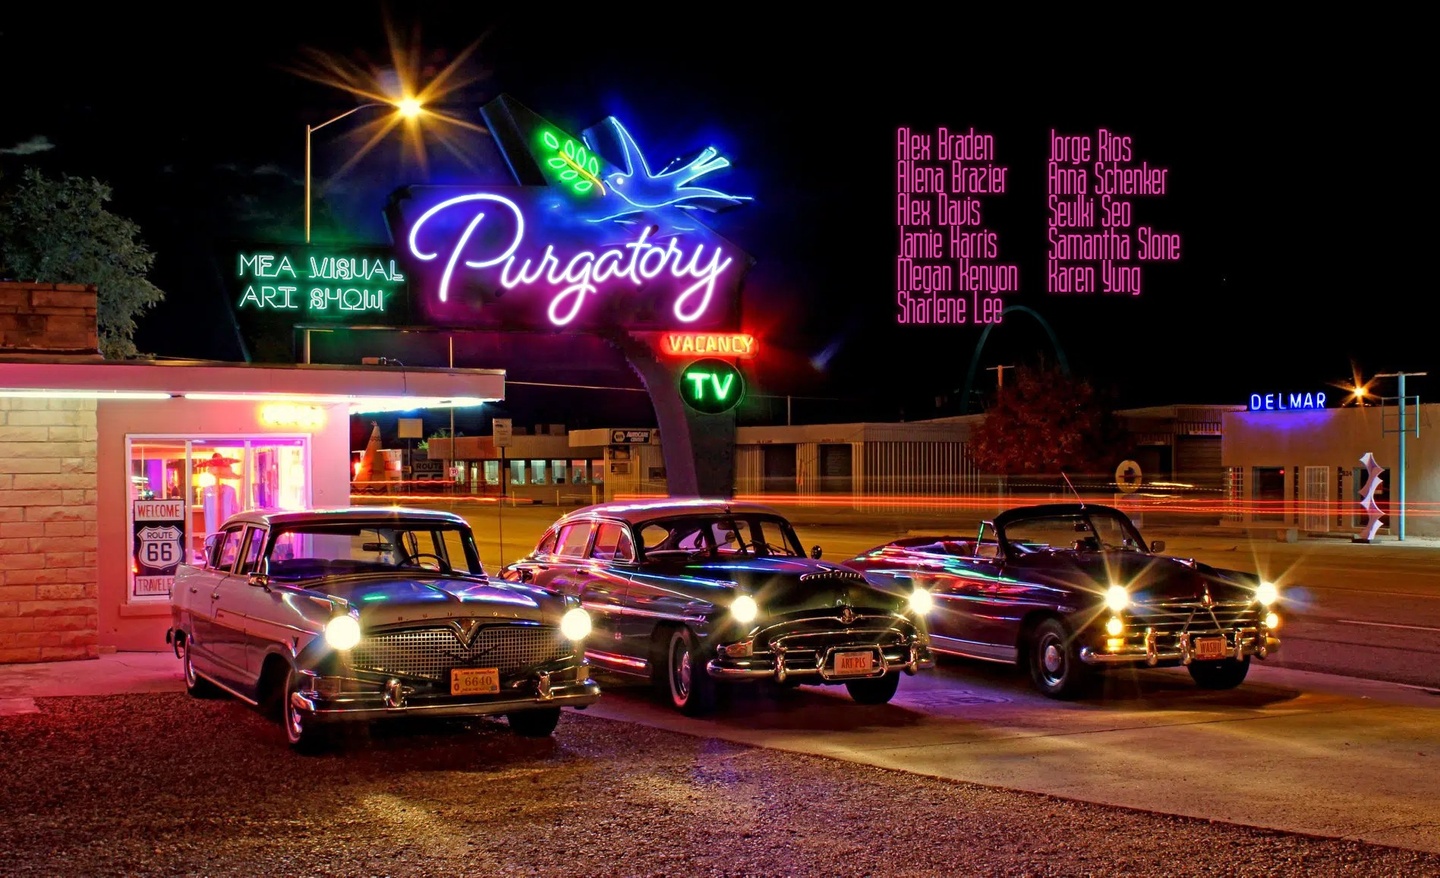 A stylized picture of three vintage sedans parked in front of a motel where the neon sign reads Purgatory, MFA Visual Art Show, and also, Vacancy, TV. A list of artist's names is overlayed on the upper right quadrant.